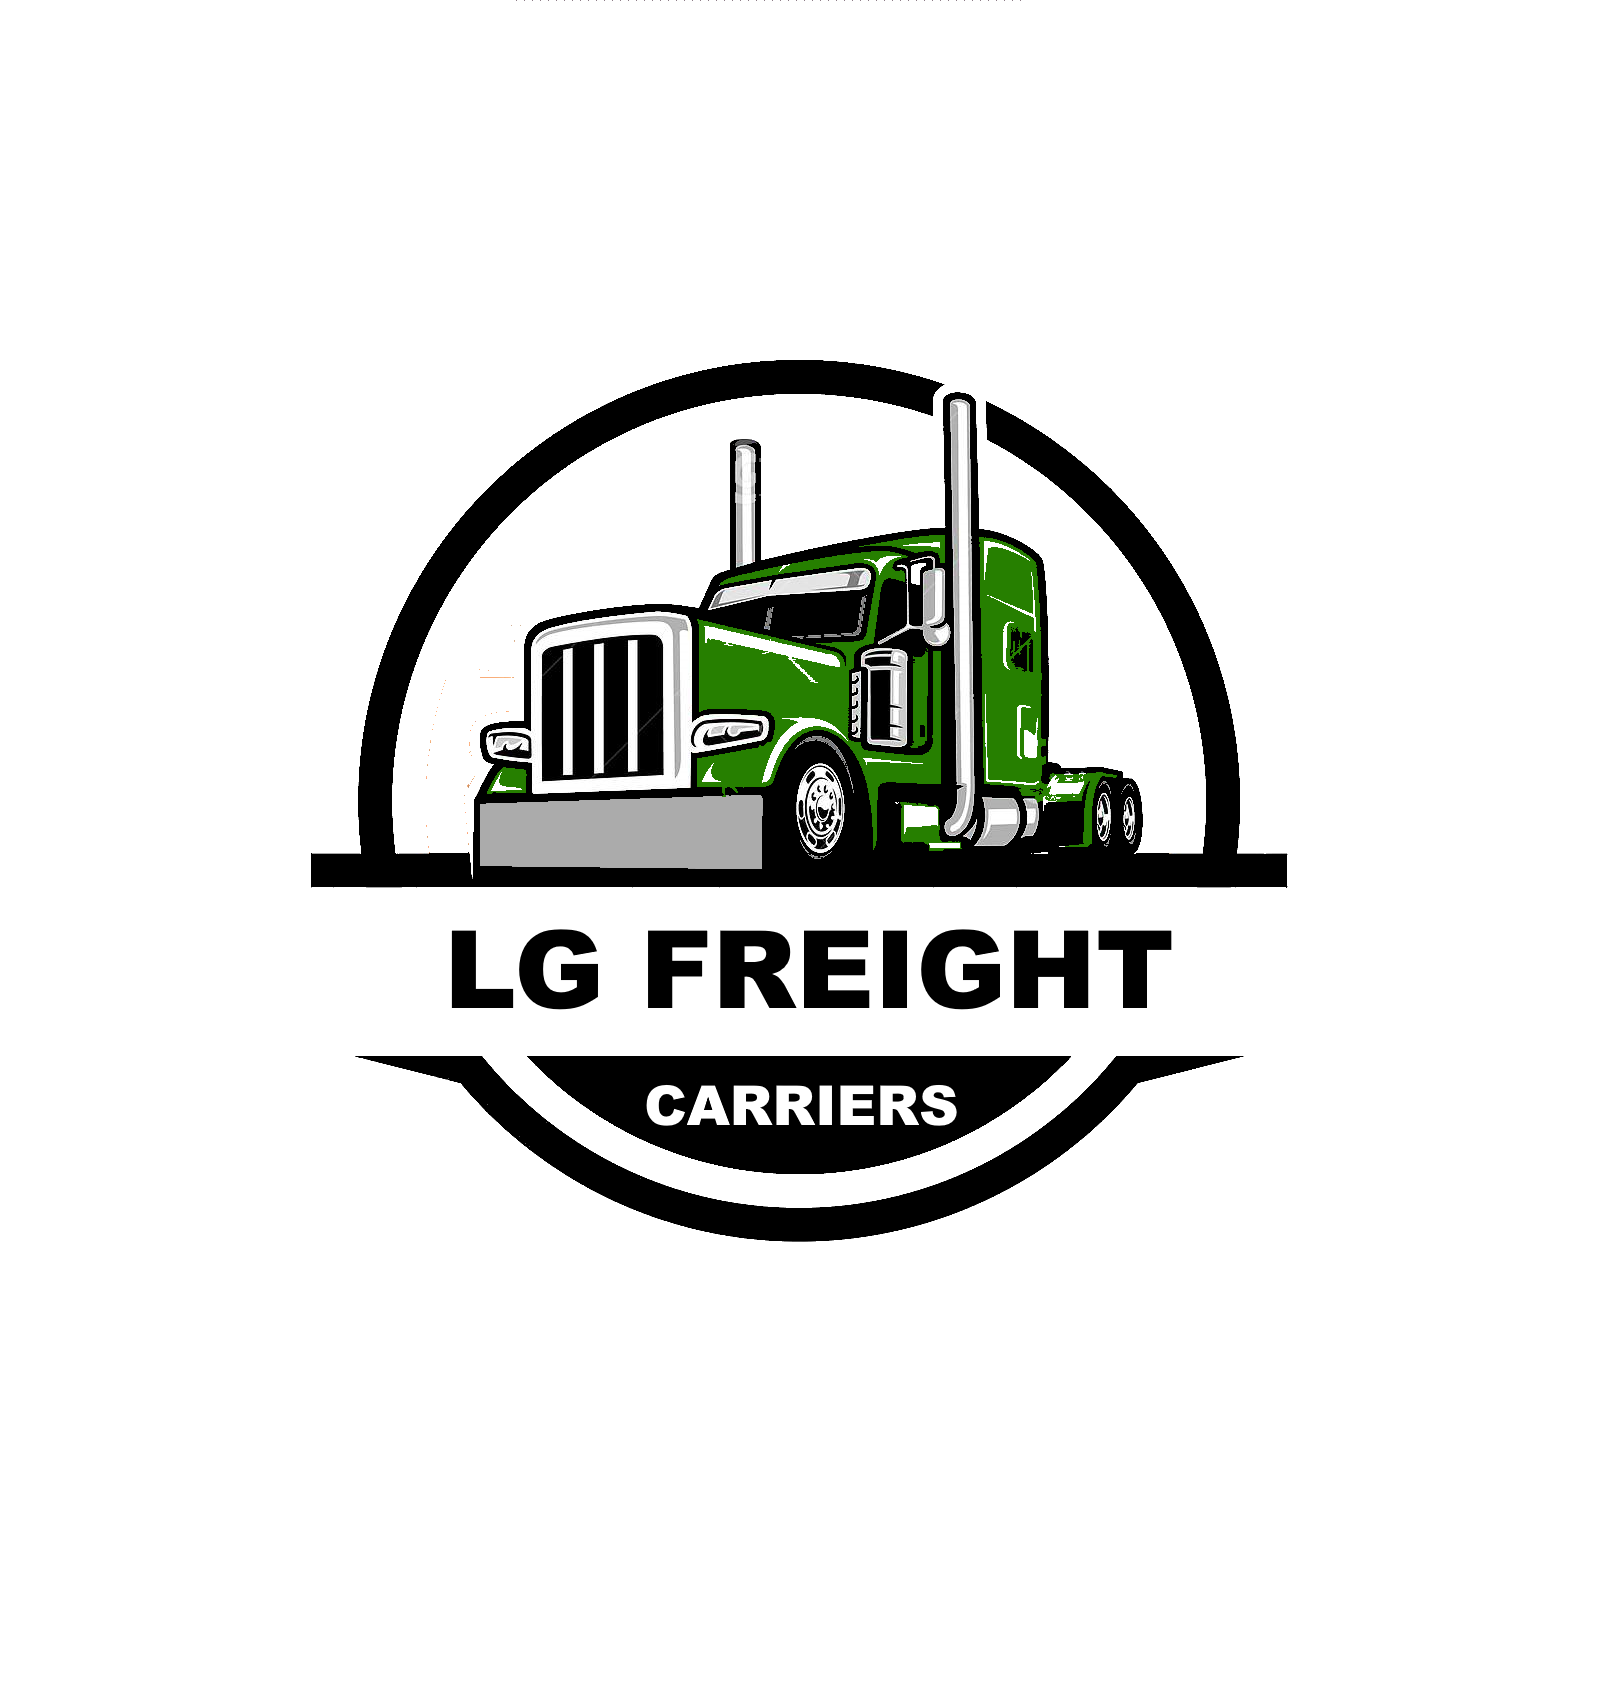 LG FREIGHT CARRIERS 